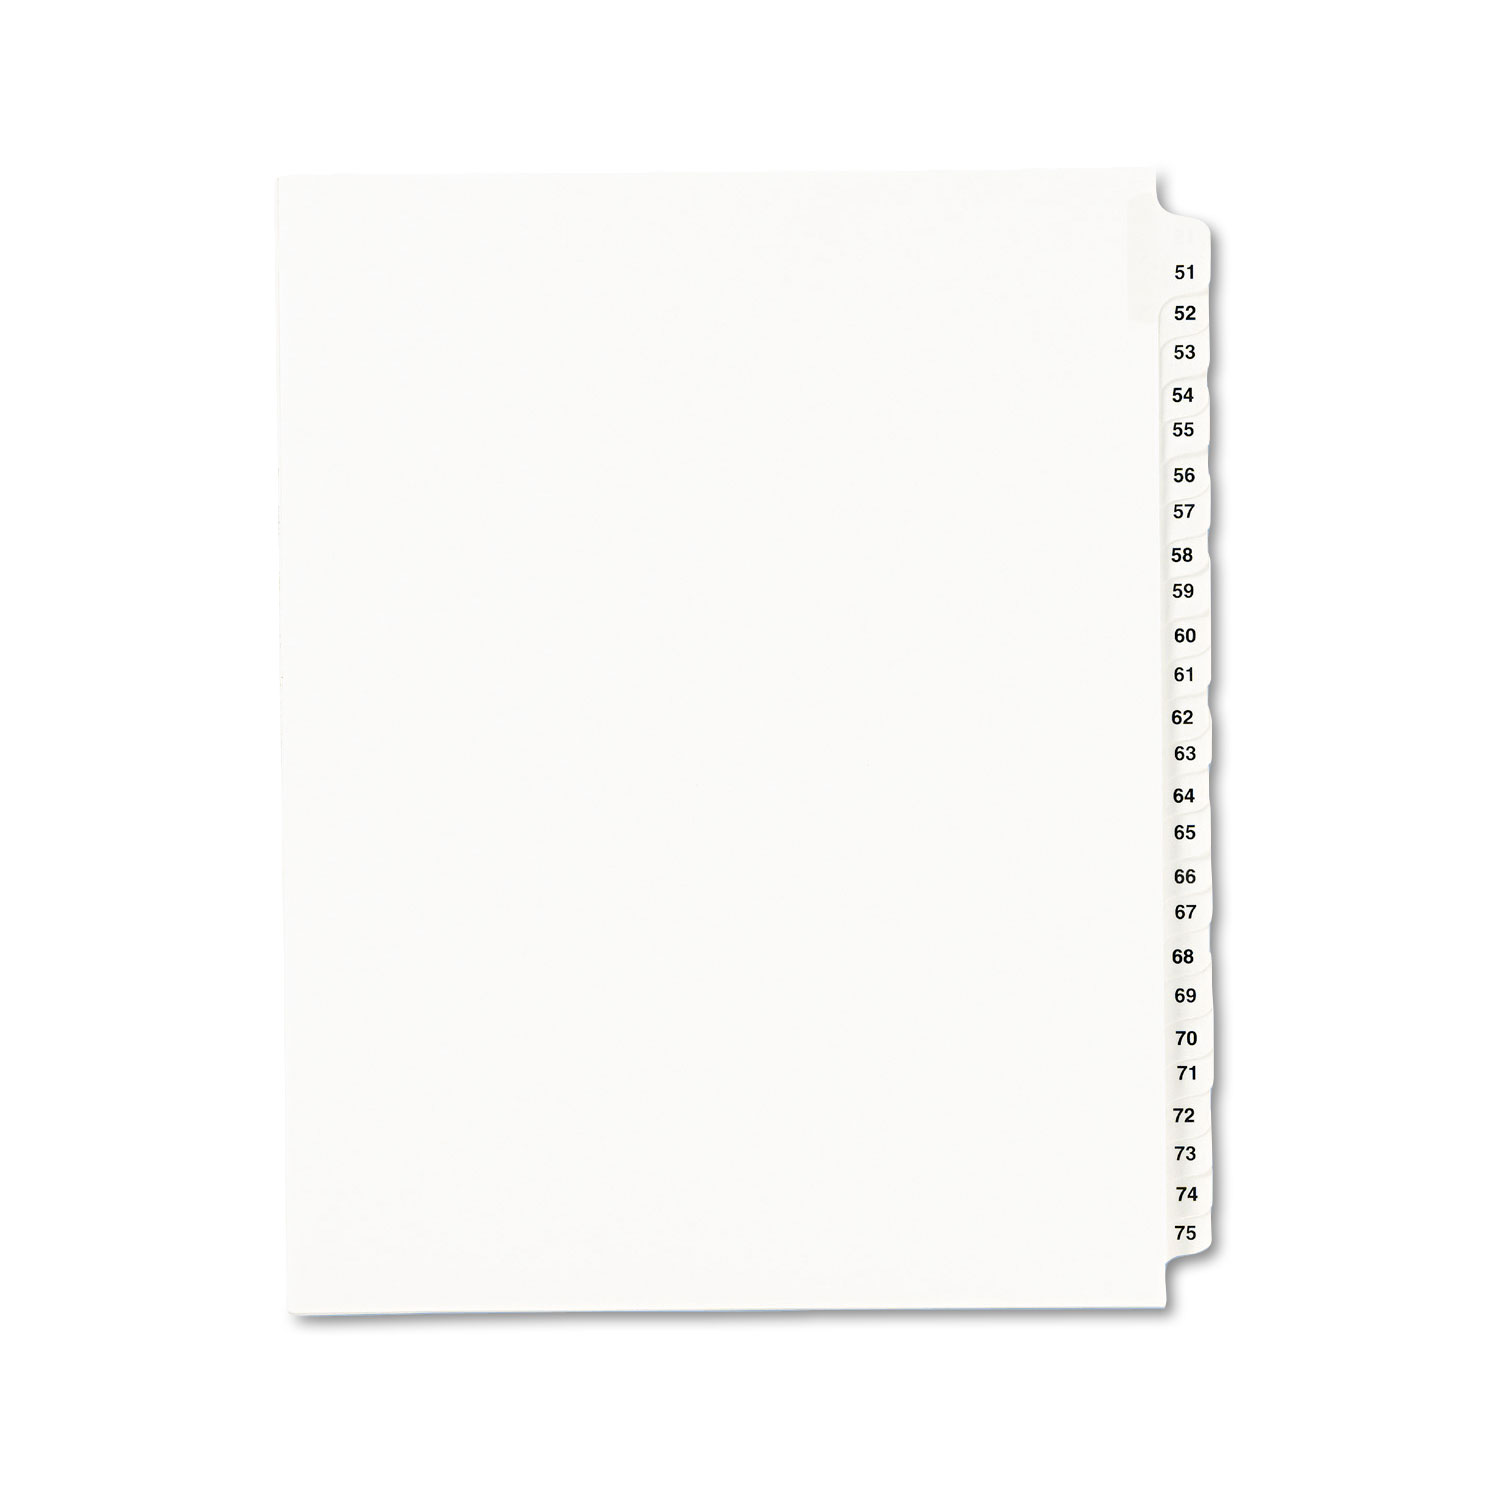  Avery 01332 Preprinted Legal Exhibit Side Tab Index Dividers, Avery Style, 25-Tab, 51 to 75, 11 x 8.5, White, 1 Set (AVE01332) 